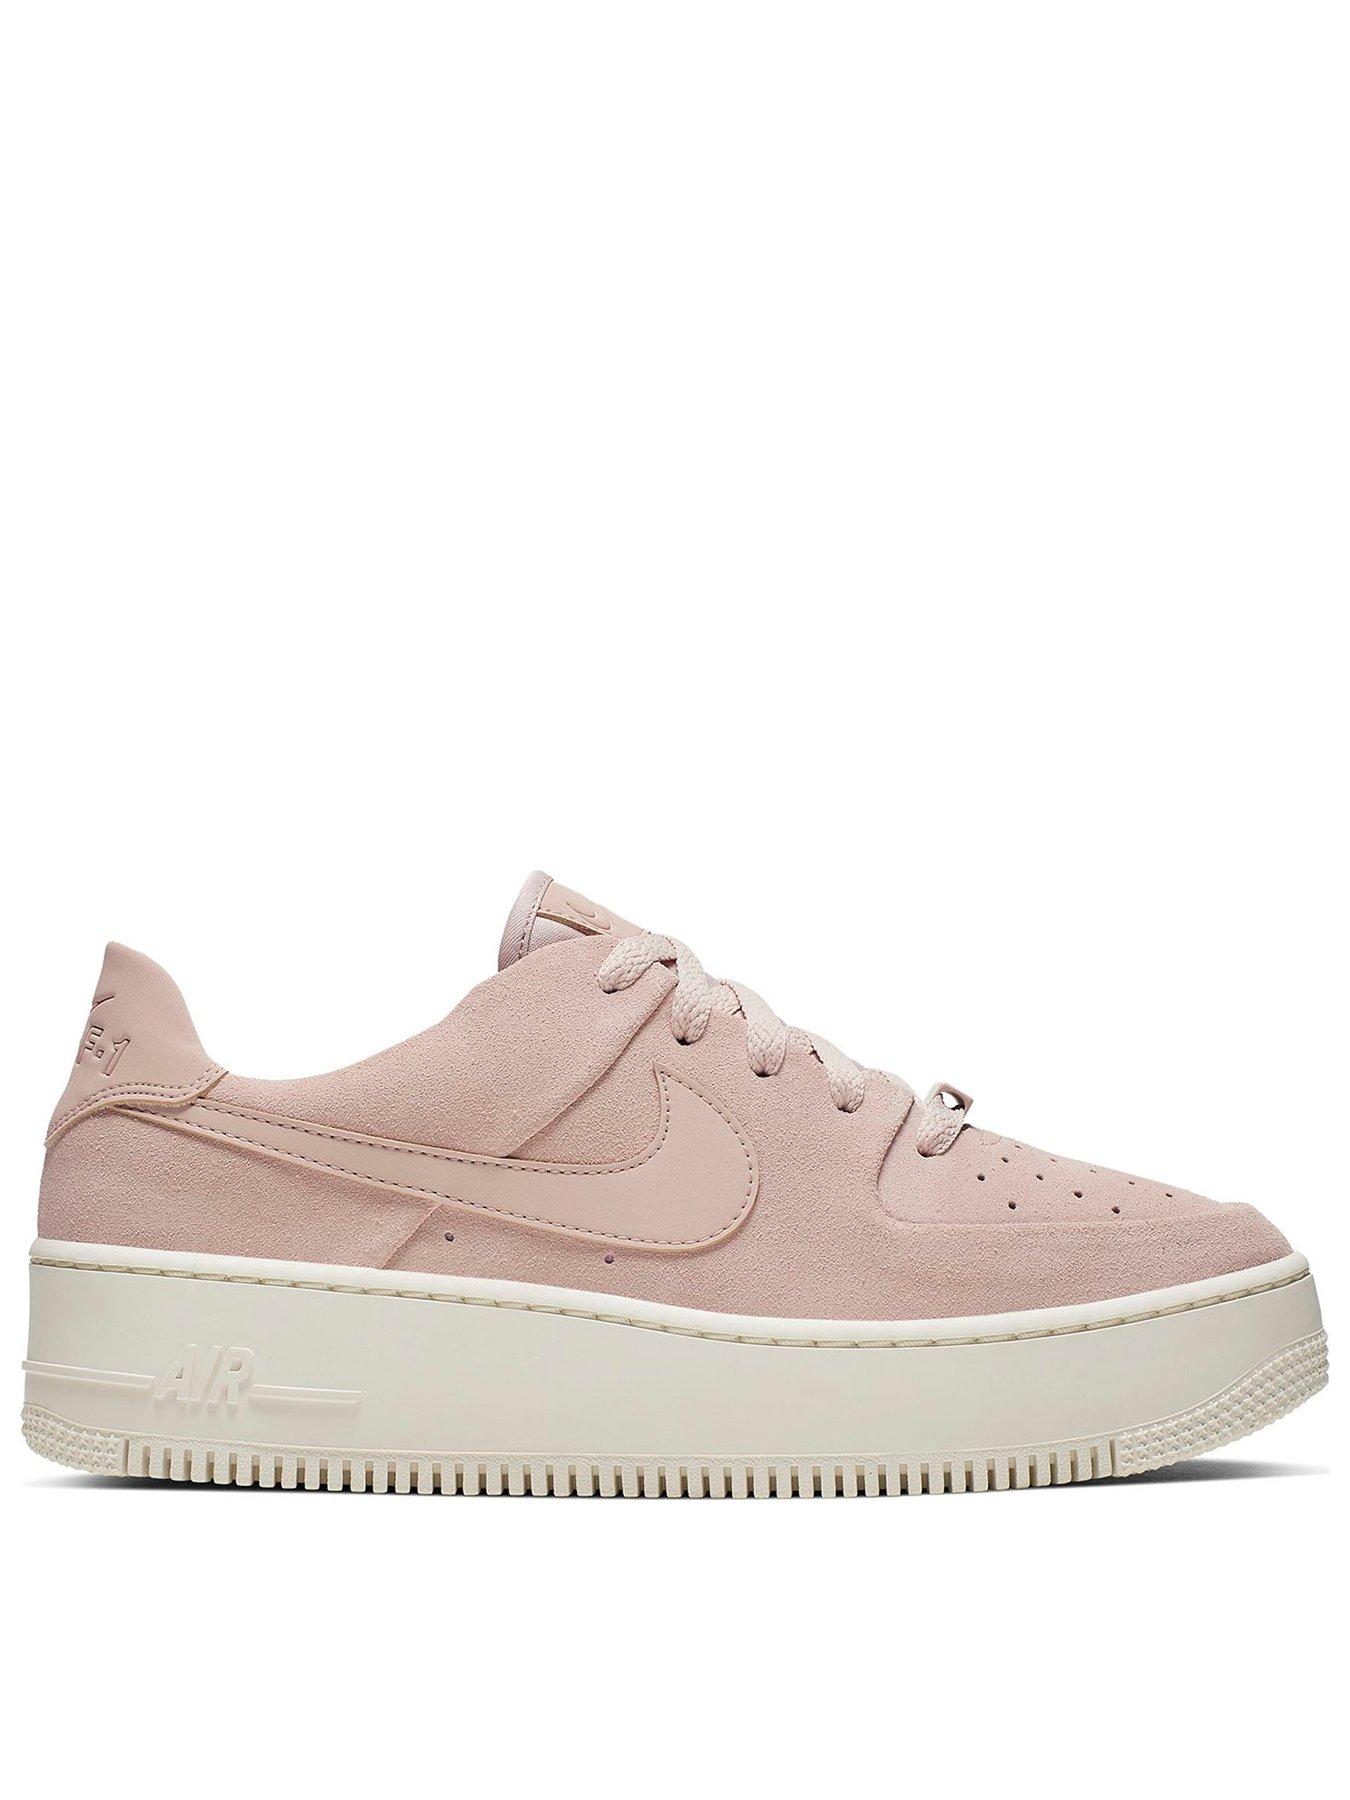 Nike Air Force 1 Sage Low - Pink/White | littlewoods.com